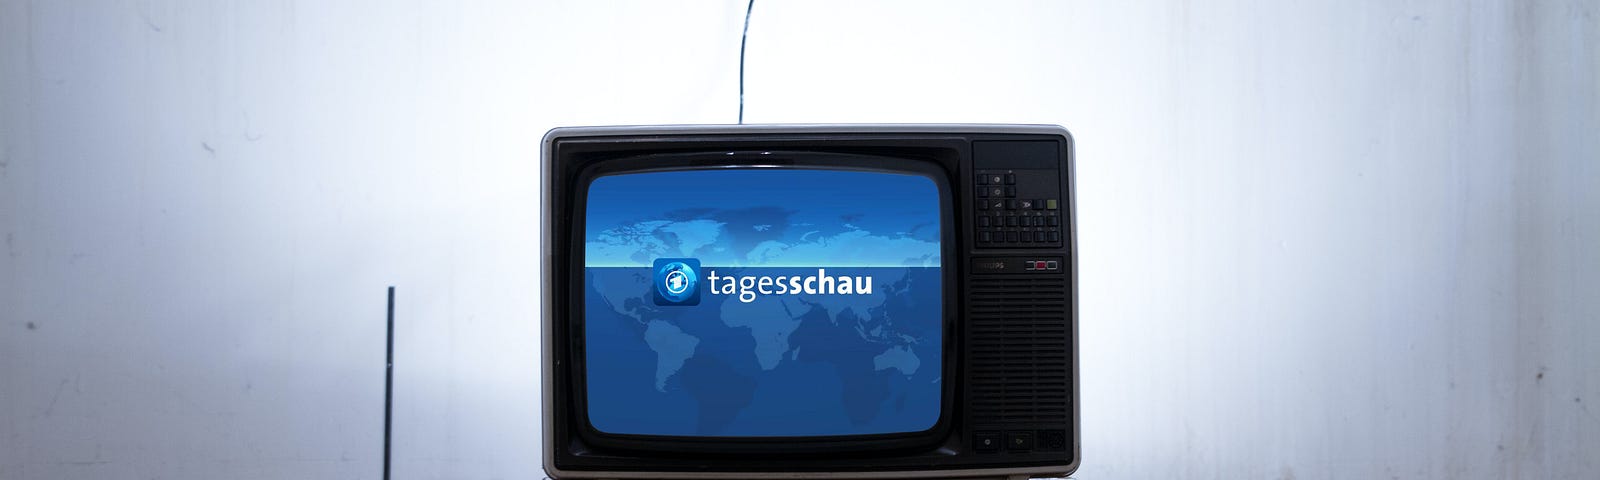 Television in empty room with blue screen and words “Tagesschau”